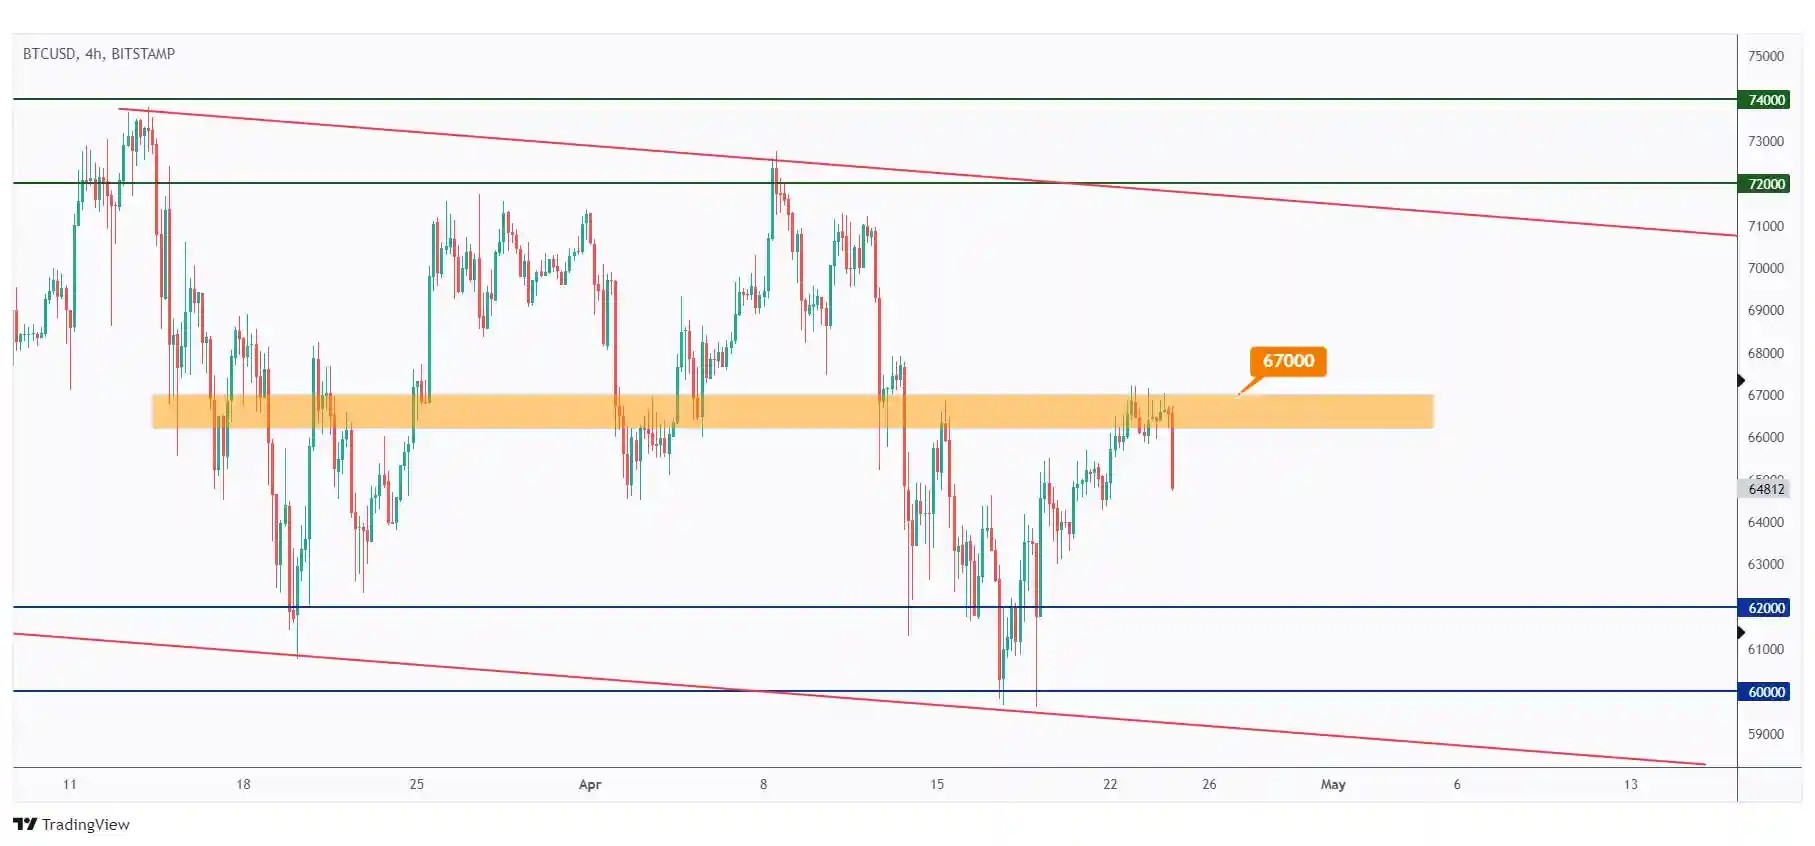 BTC 4h chart showing the last major high at $67,000 that we need a break above for the bulls to take over.